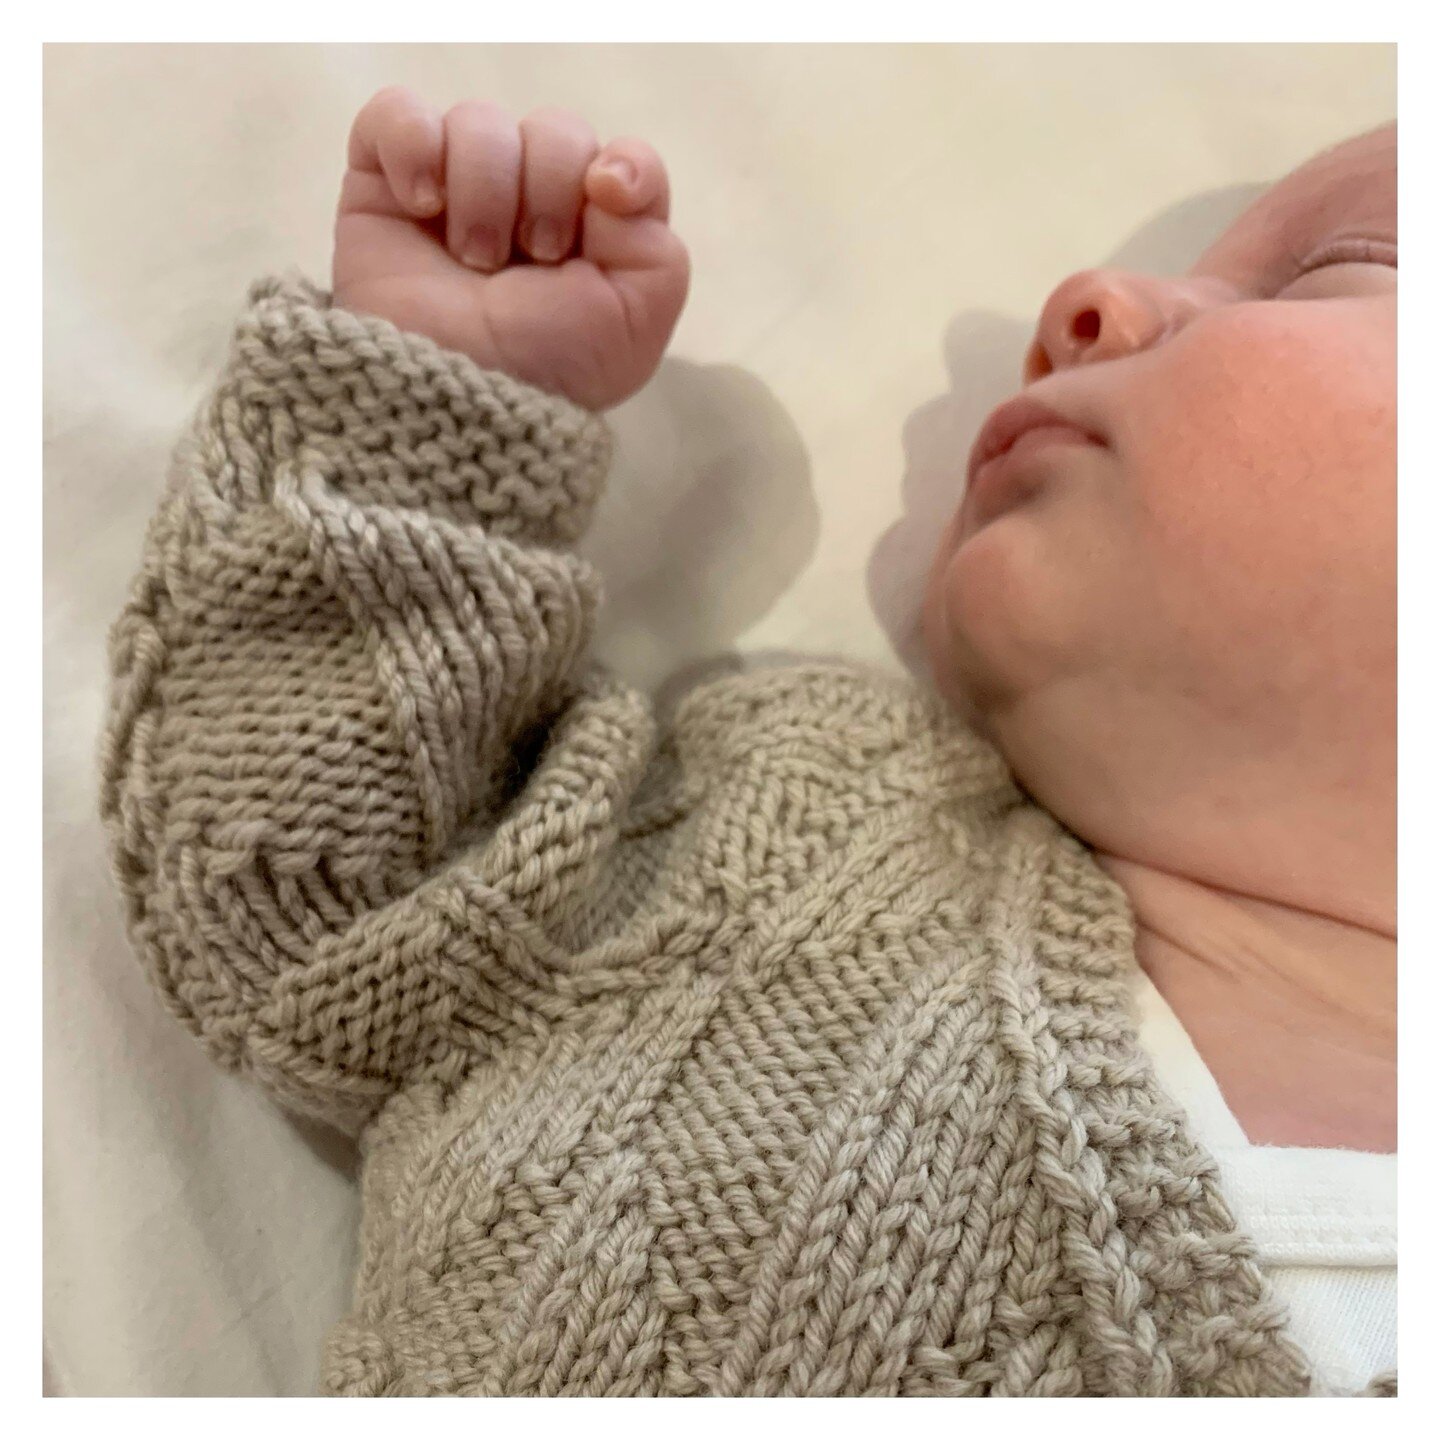 Two things I made last year; a baby and this cardigan 🥰

Yarn: Double Sunday by @petiteknit &amp; @sandnesgarn in Cardamom. Purchased from @knitandlivinguk. 

Pattern: Bluebell by @georgiafarrelldesign